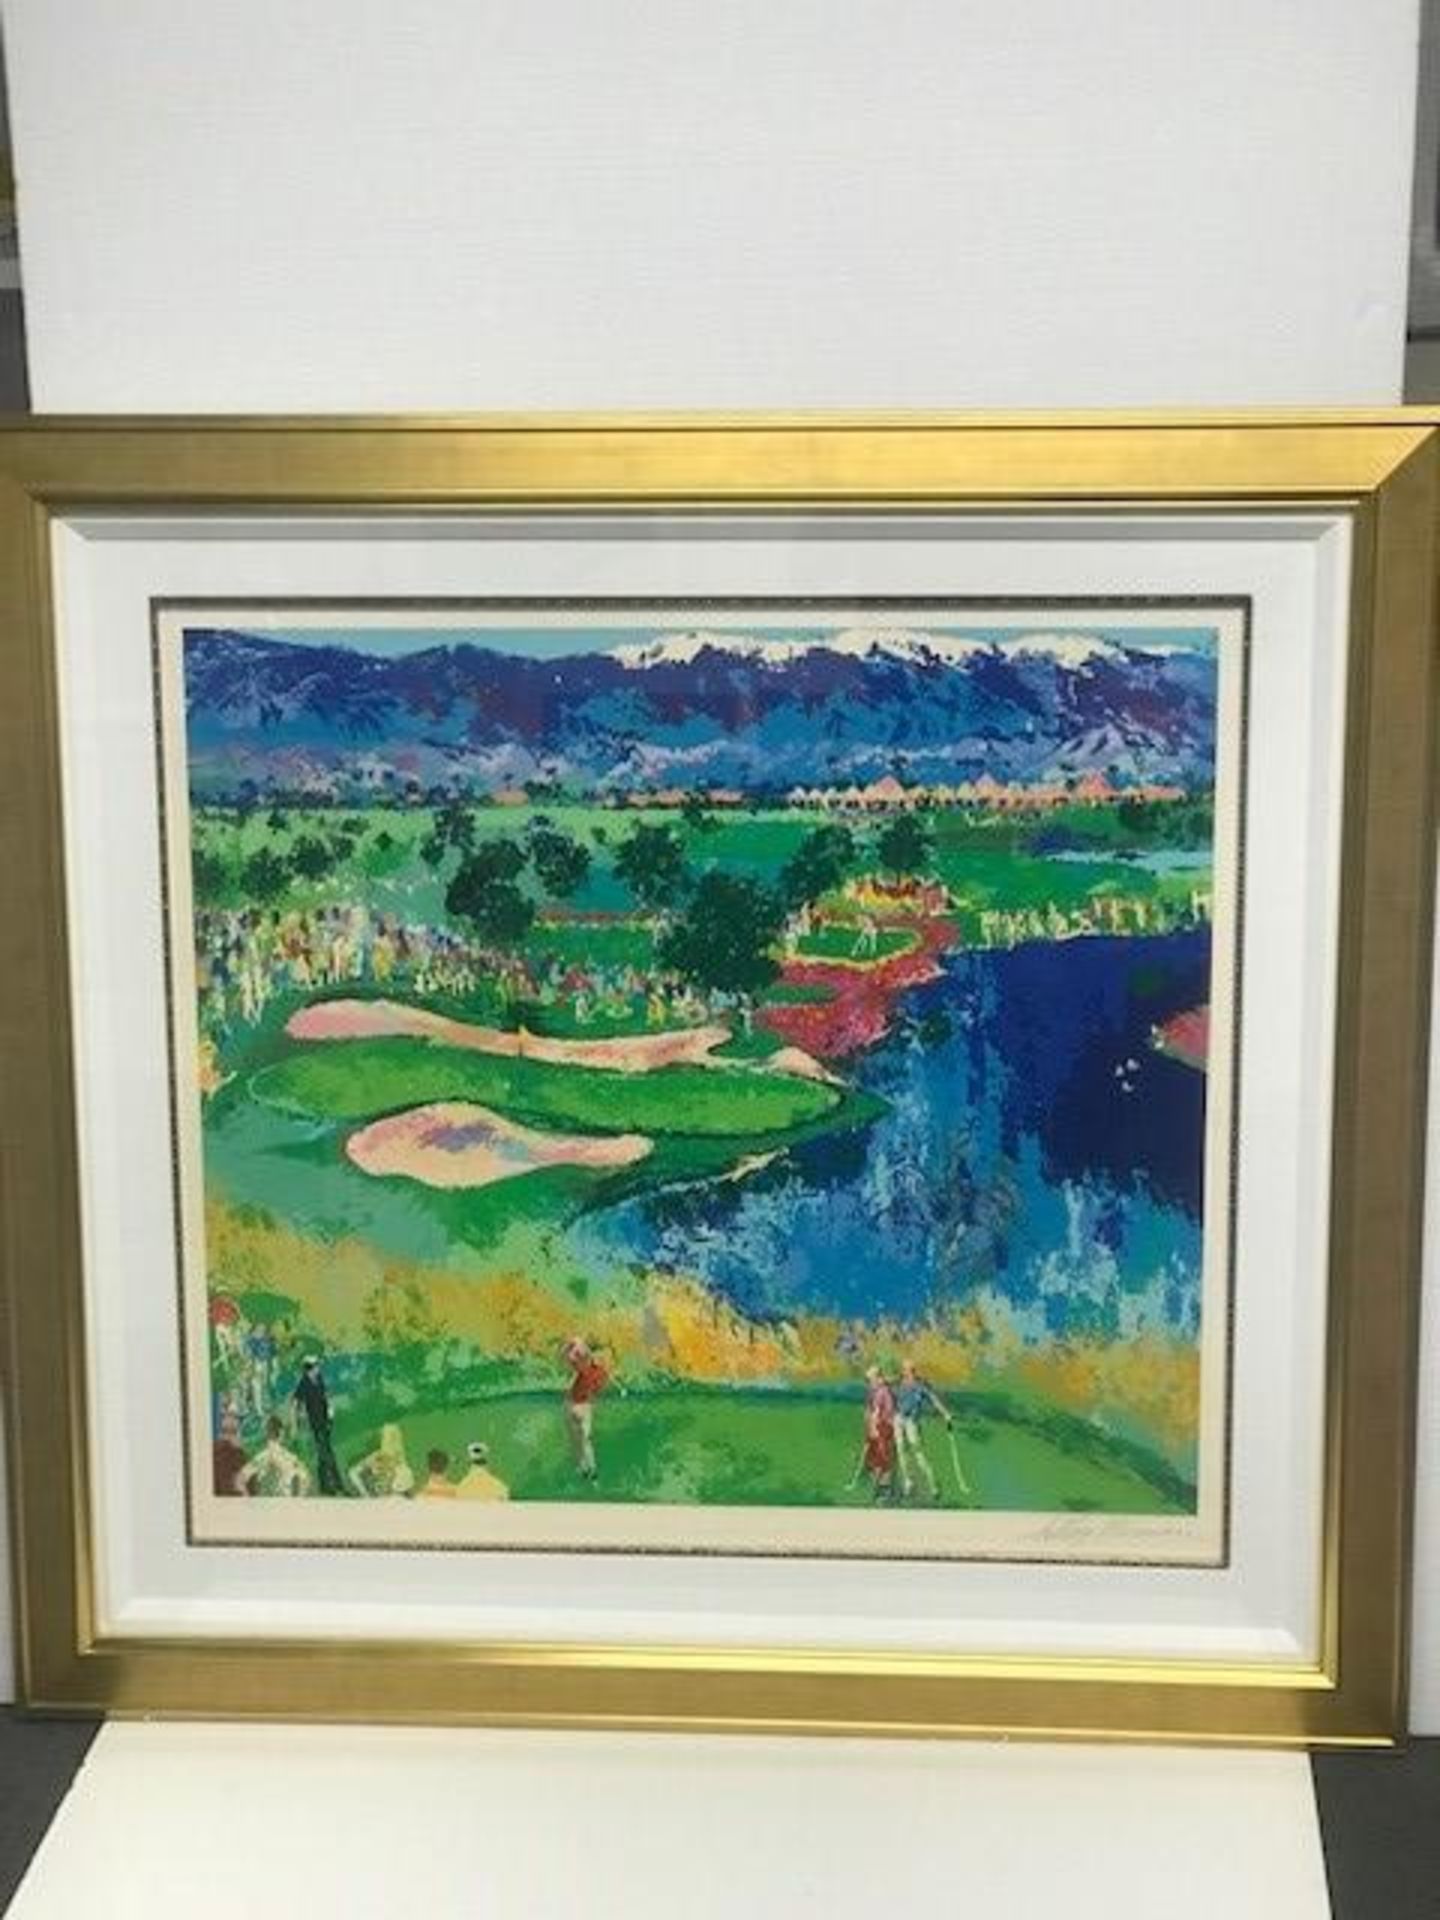 Cove at Vintage by LeRoy Neiman (1921-2012)